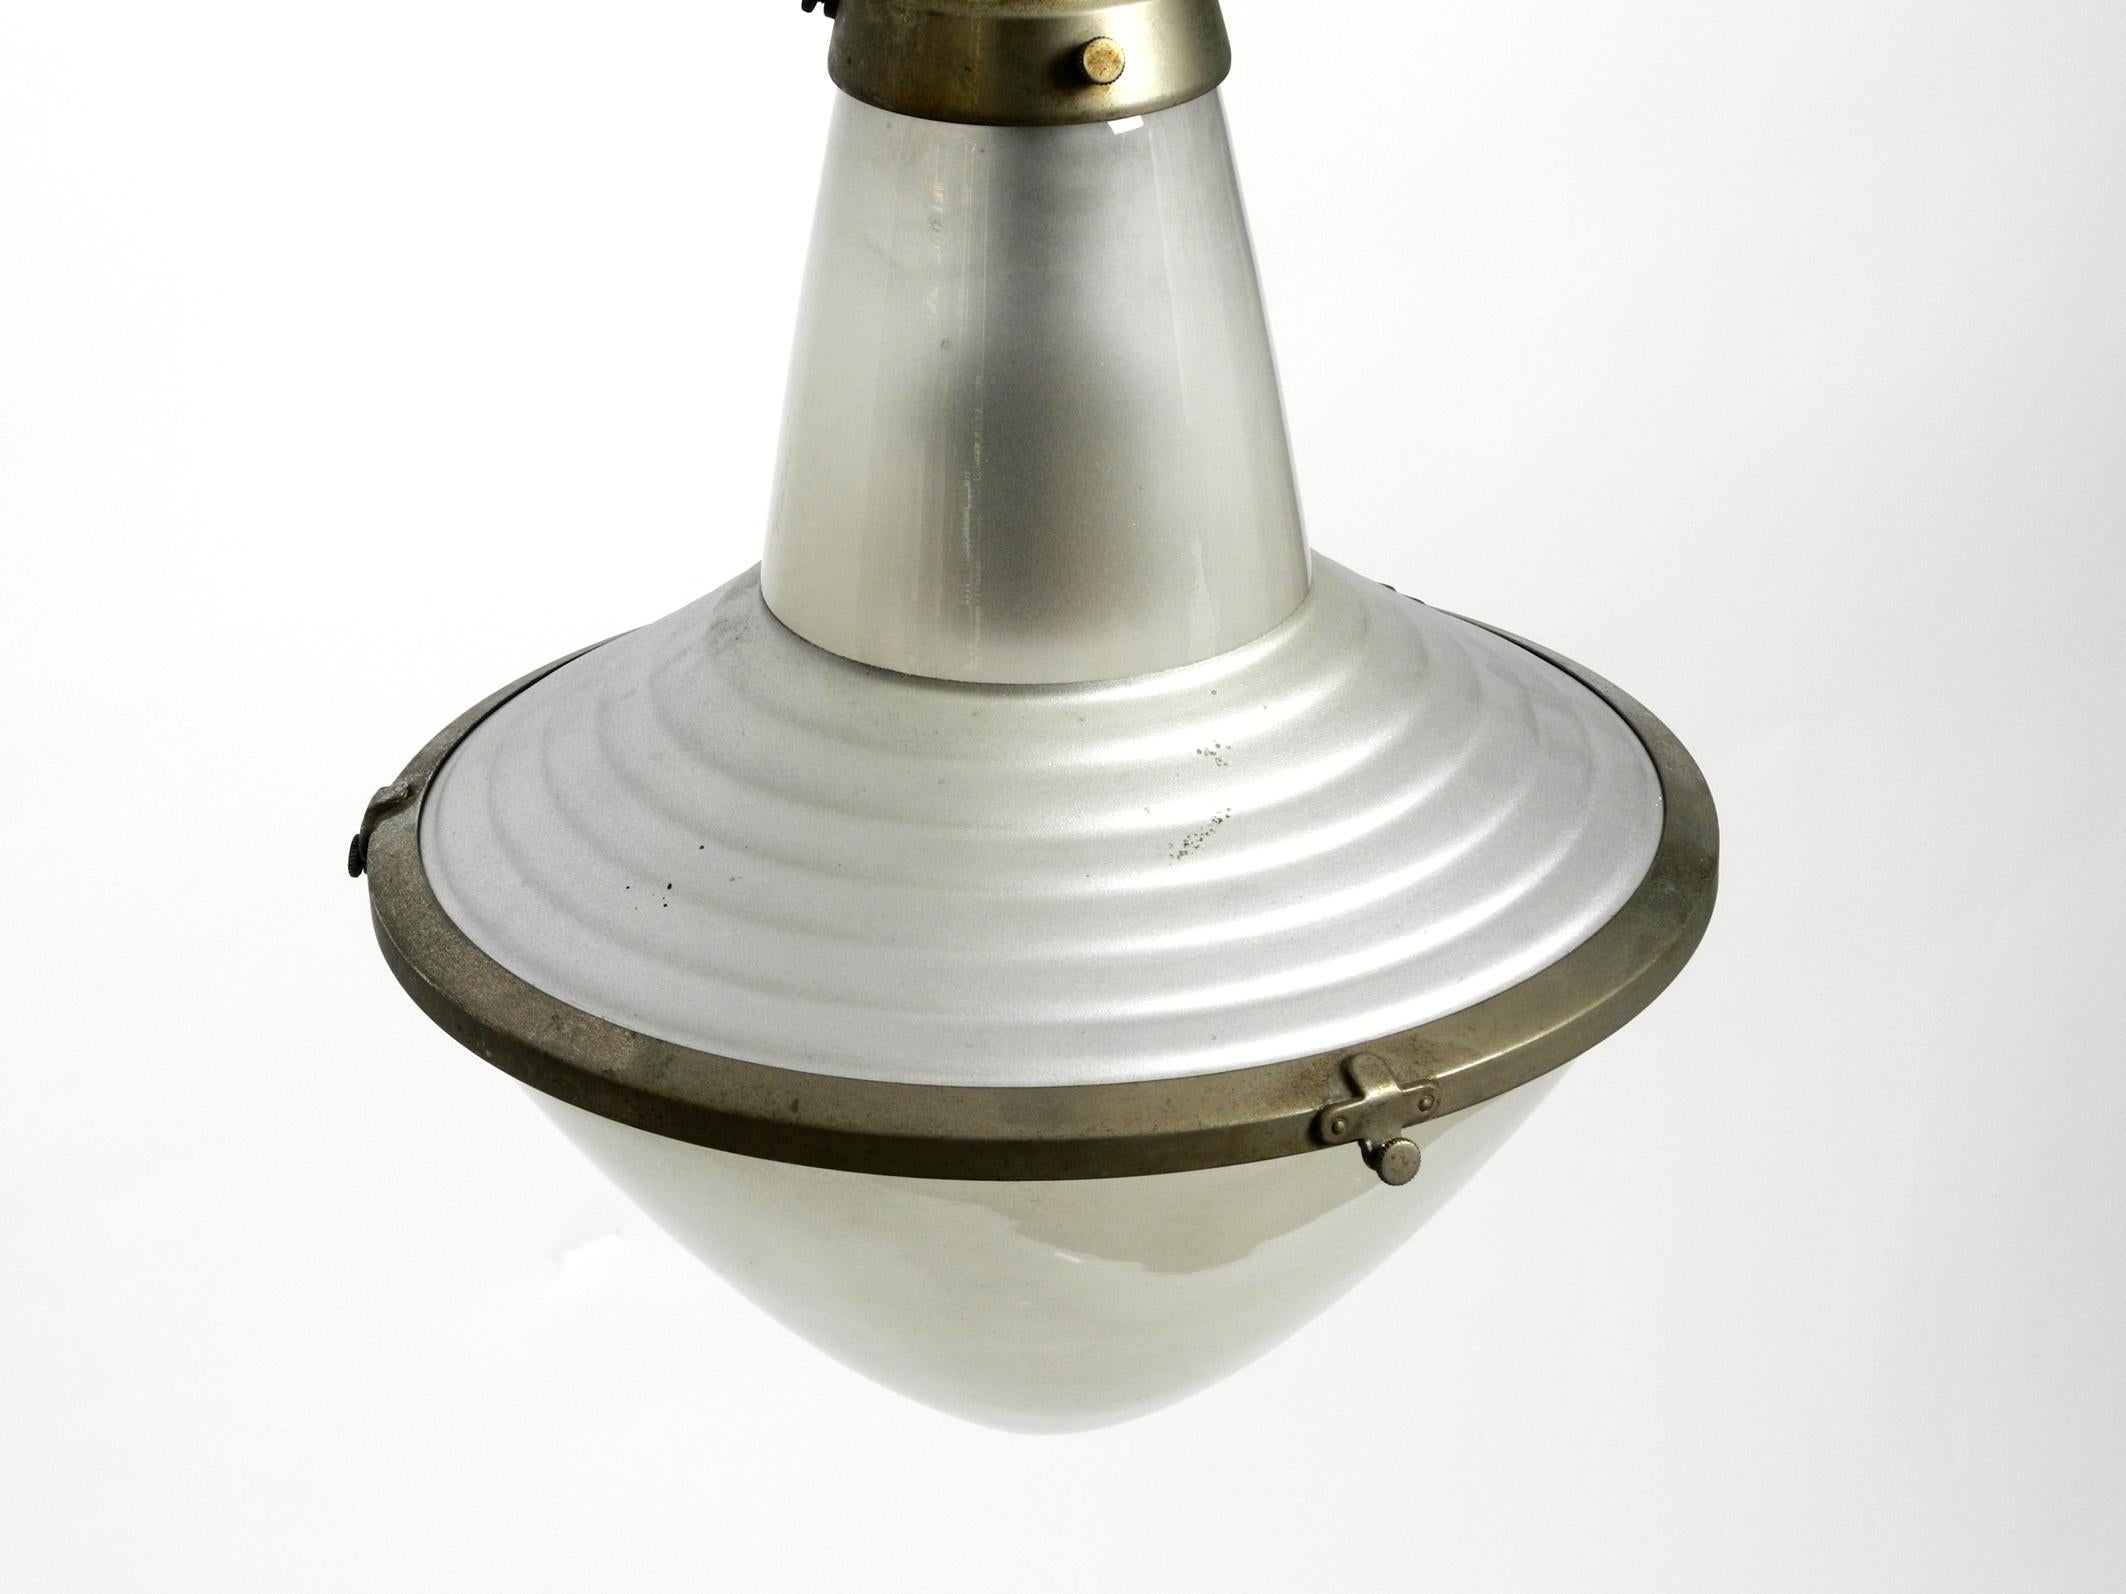 Rare 1930s Pendant Lamp by Adolf Meyer for Zeiss Ikon with an Adjustable Shade 6